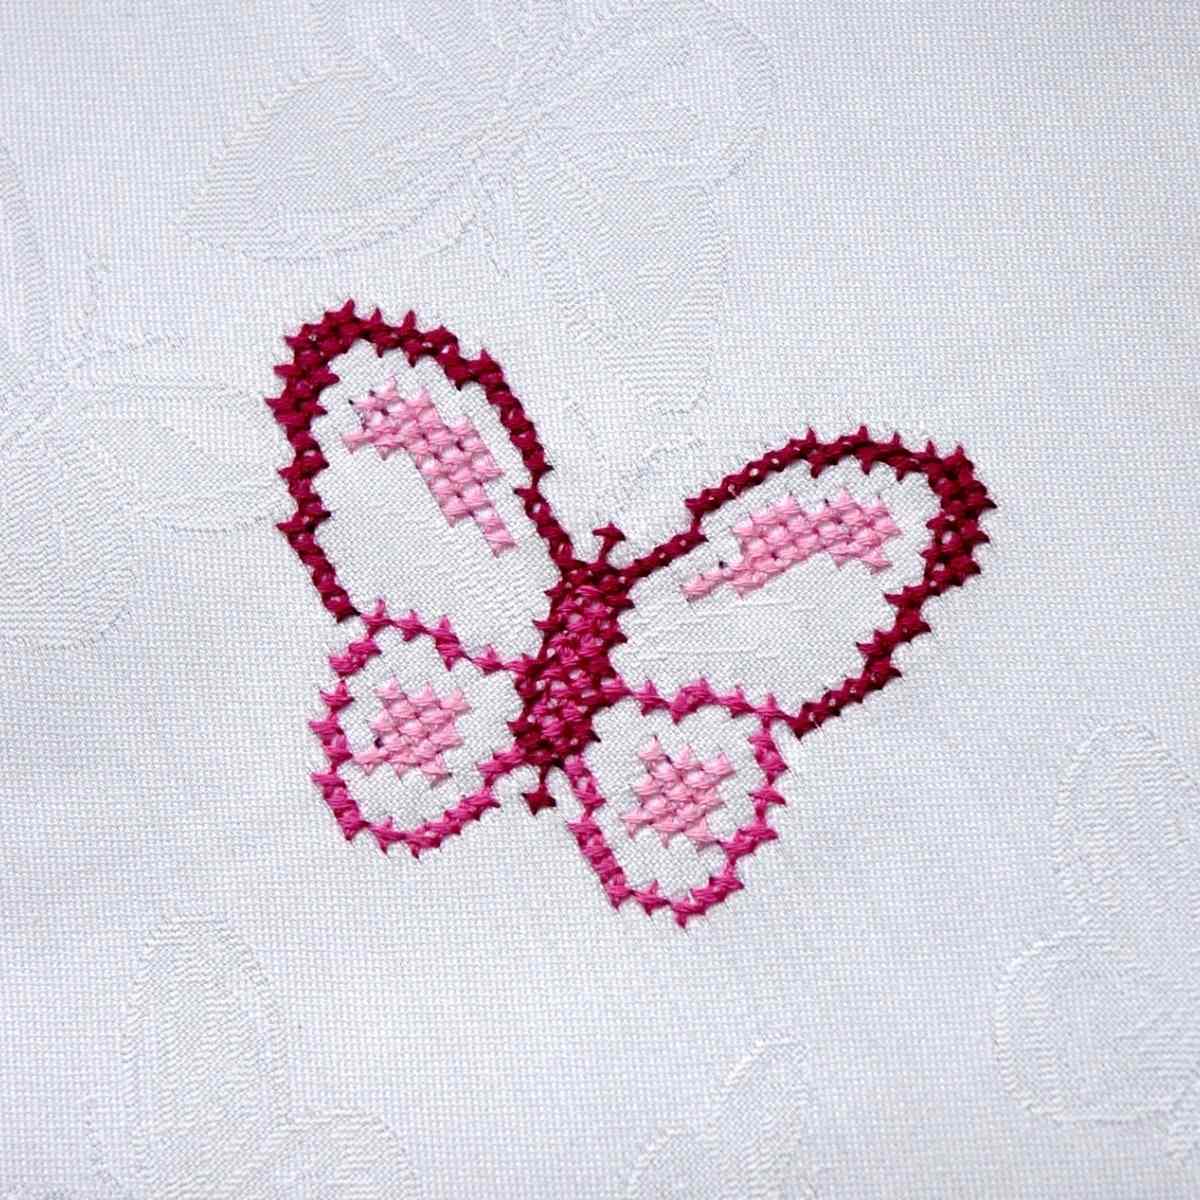 Simple butterfly embroidery ideas